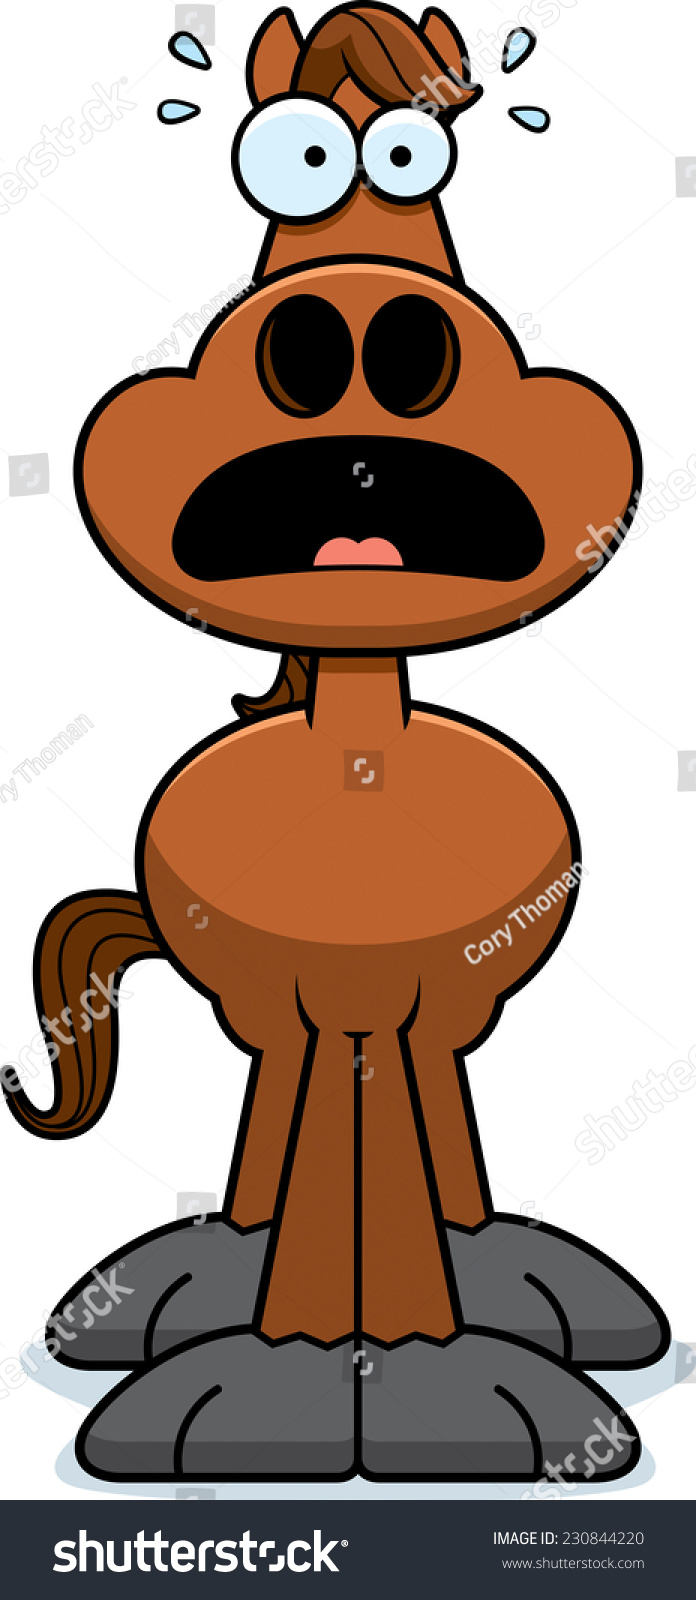 Cartoon Illustration Horse Looking Scared Stock Vector (Royalty Free